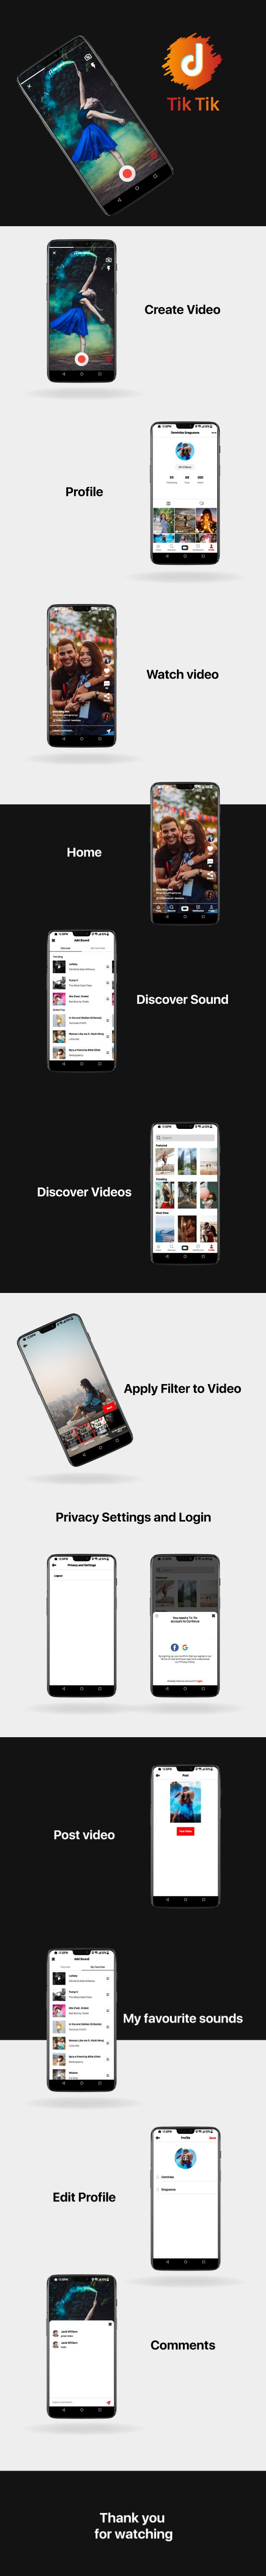 TicTic -  Android media app for creating and sharing short videos - 5